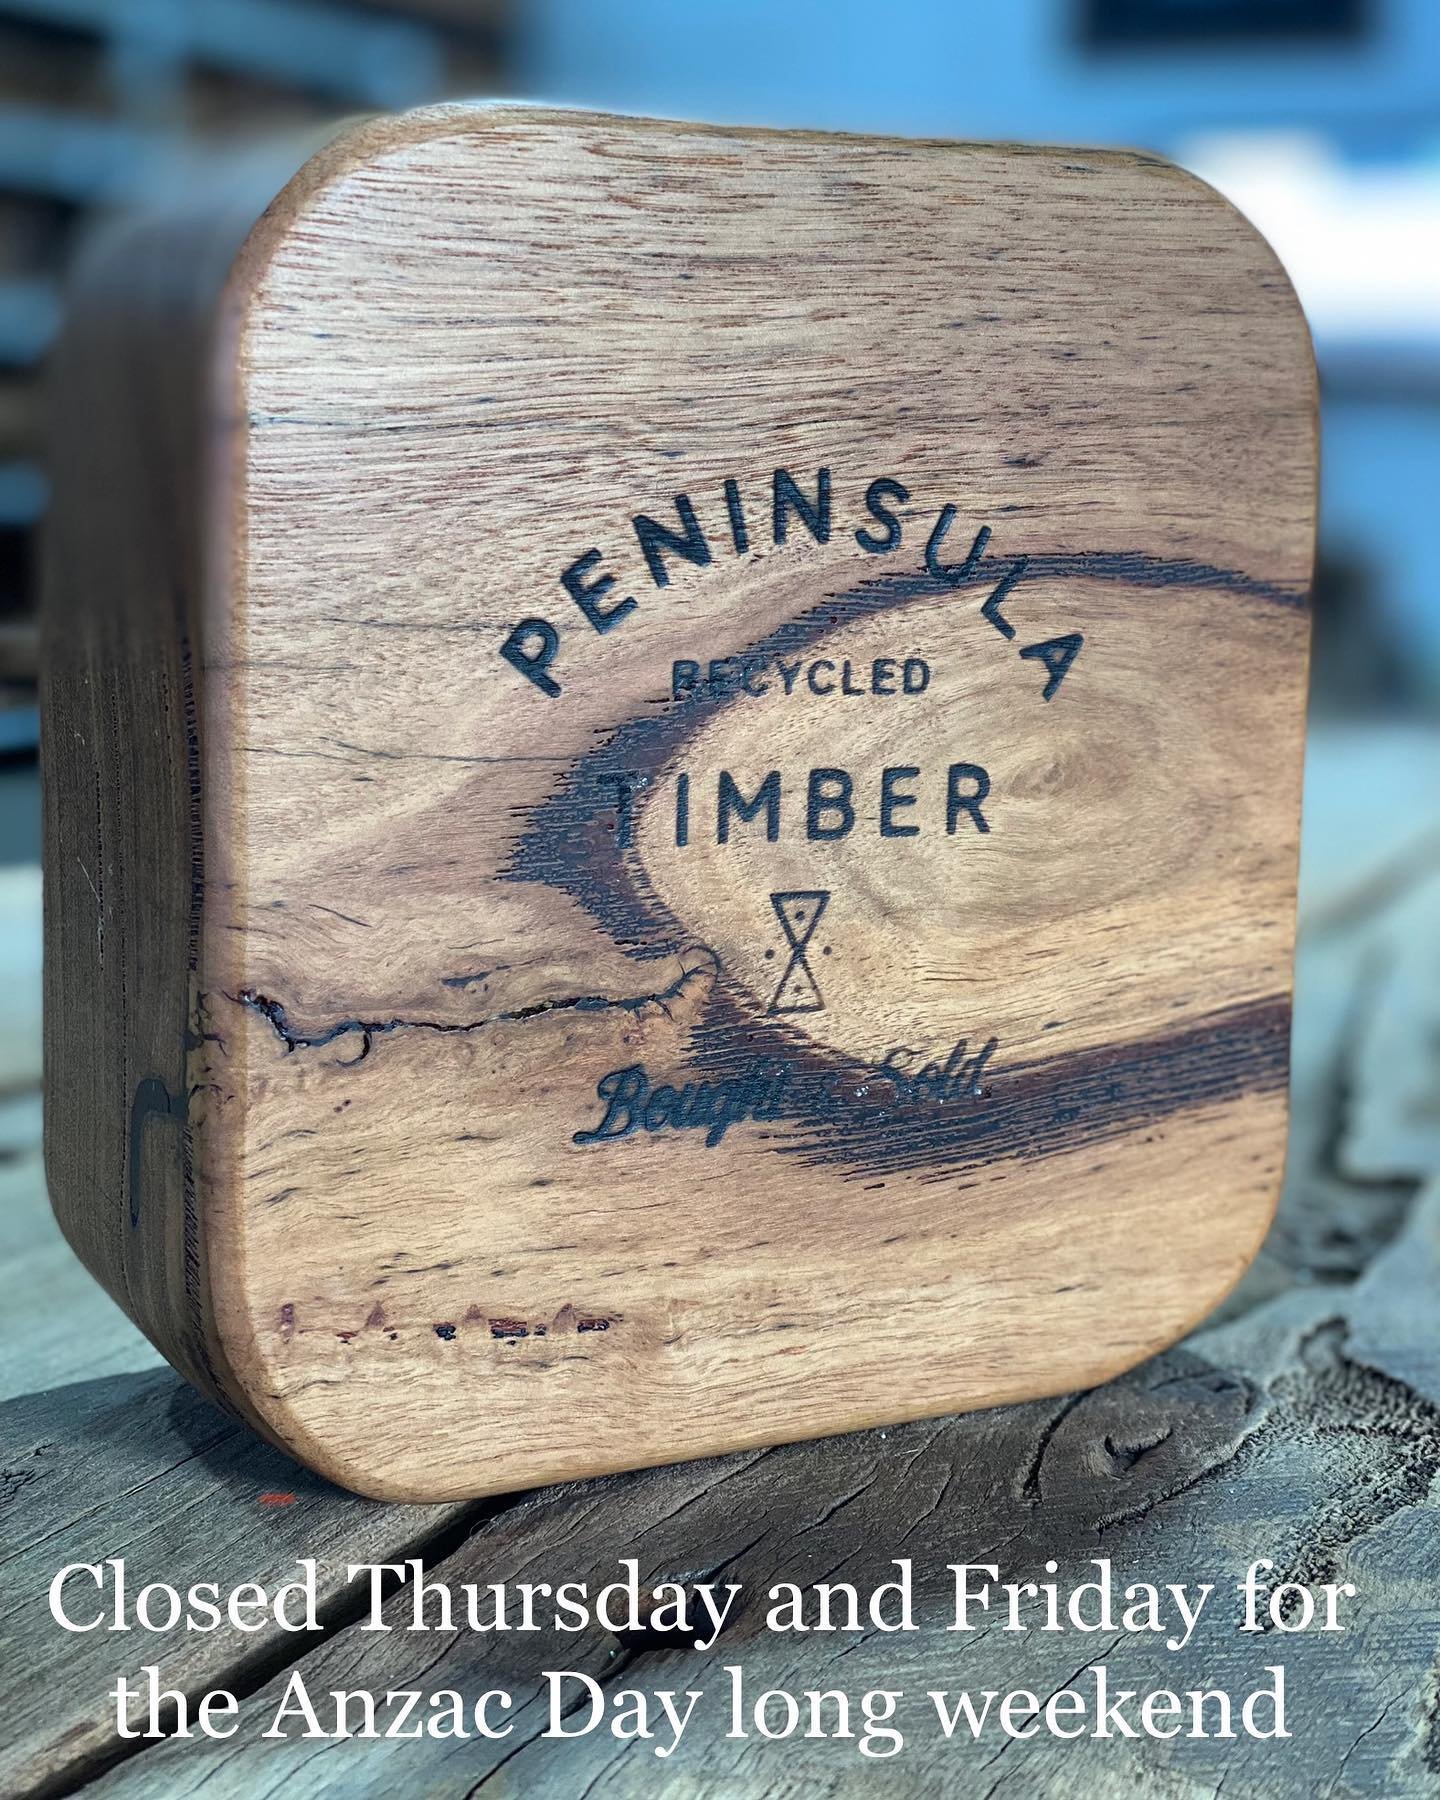 Peninsula Recycled Timber will be closed this Thursday and Friday for the Anzac Day long weekend. Back on deck Monday. 👍🌳⚒️🌺